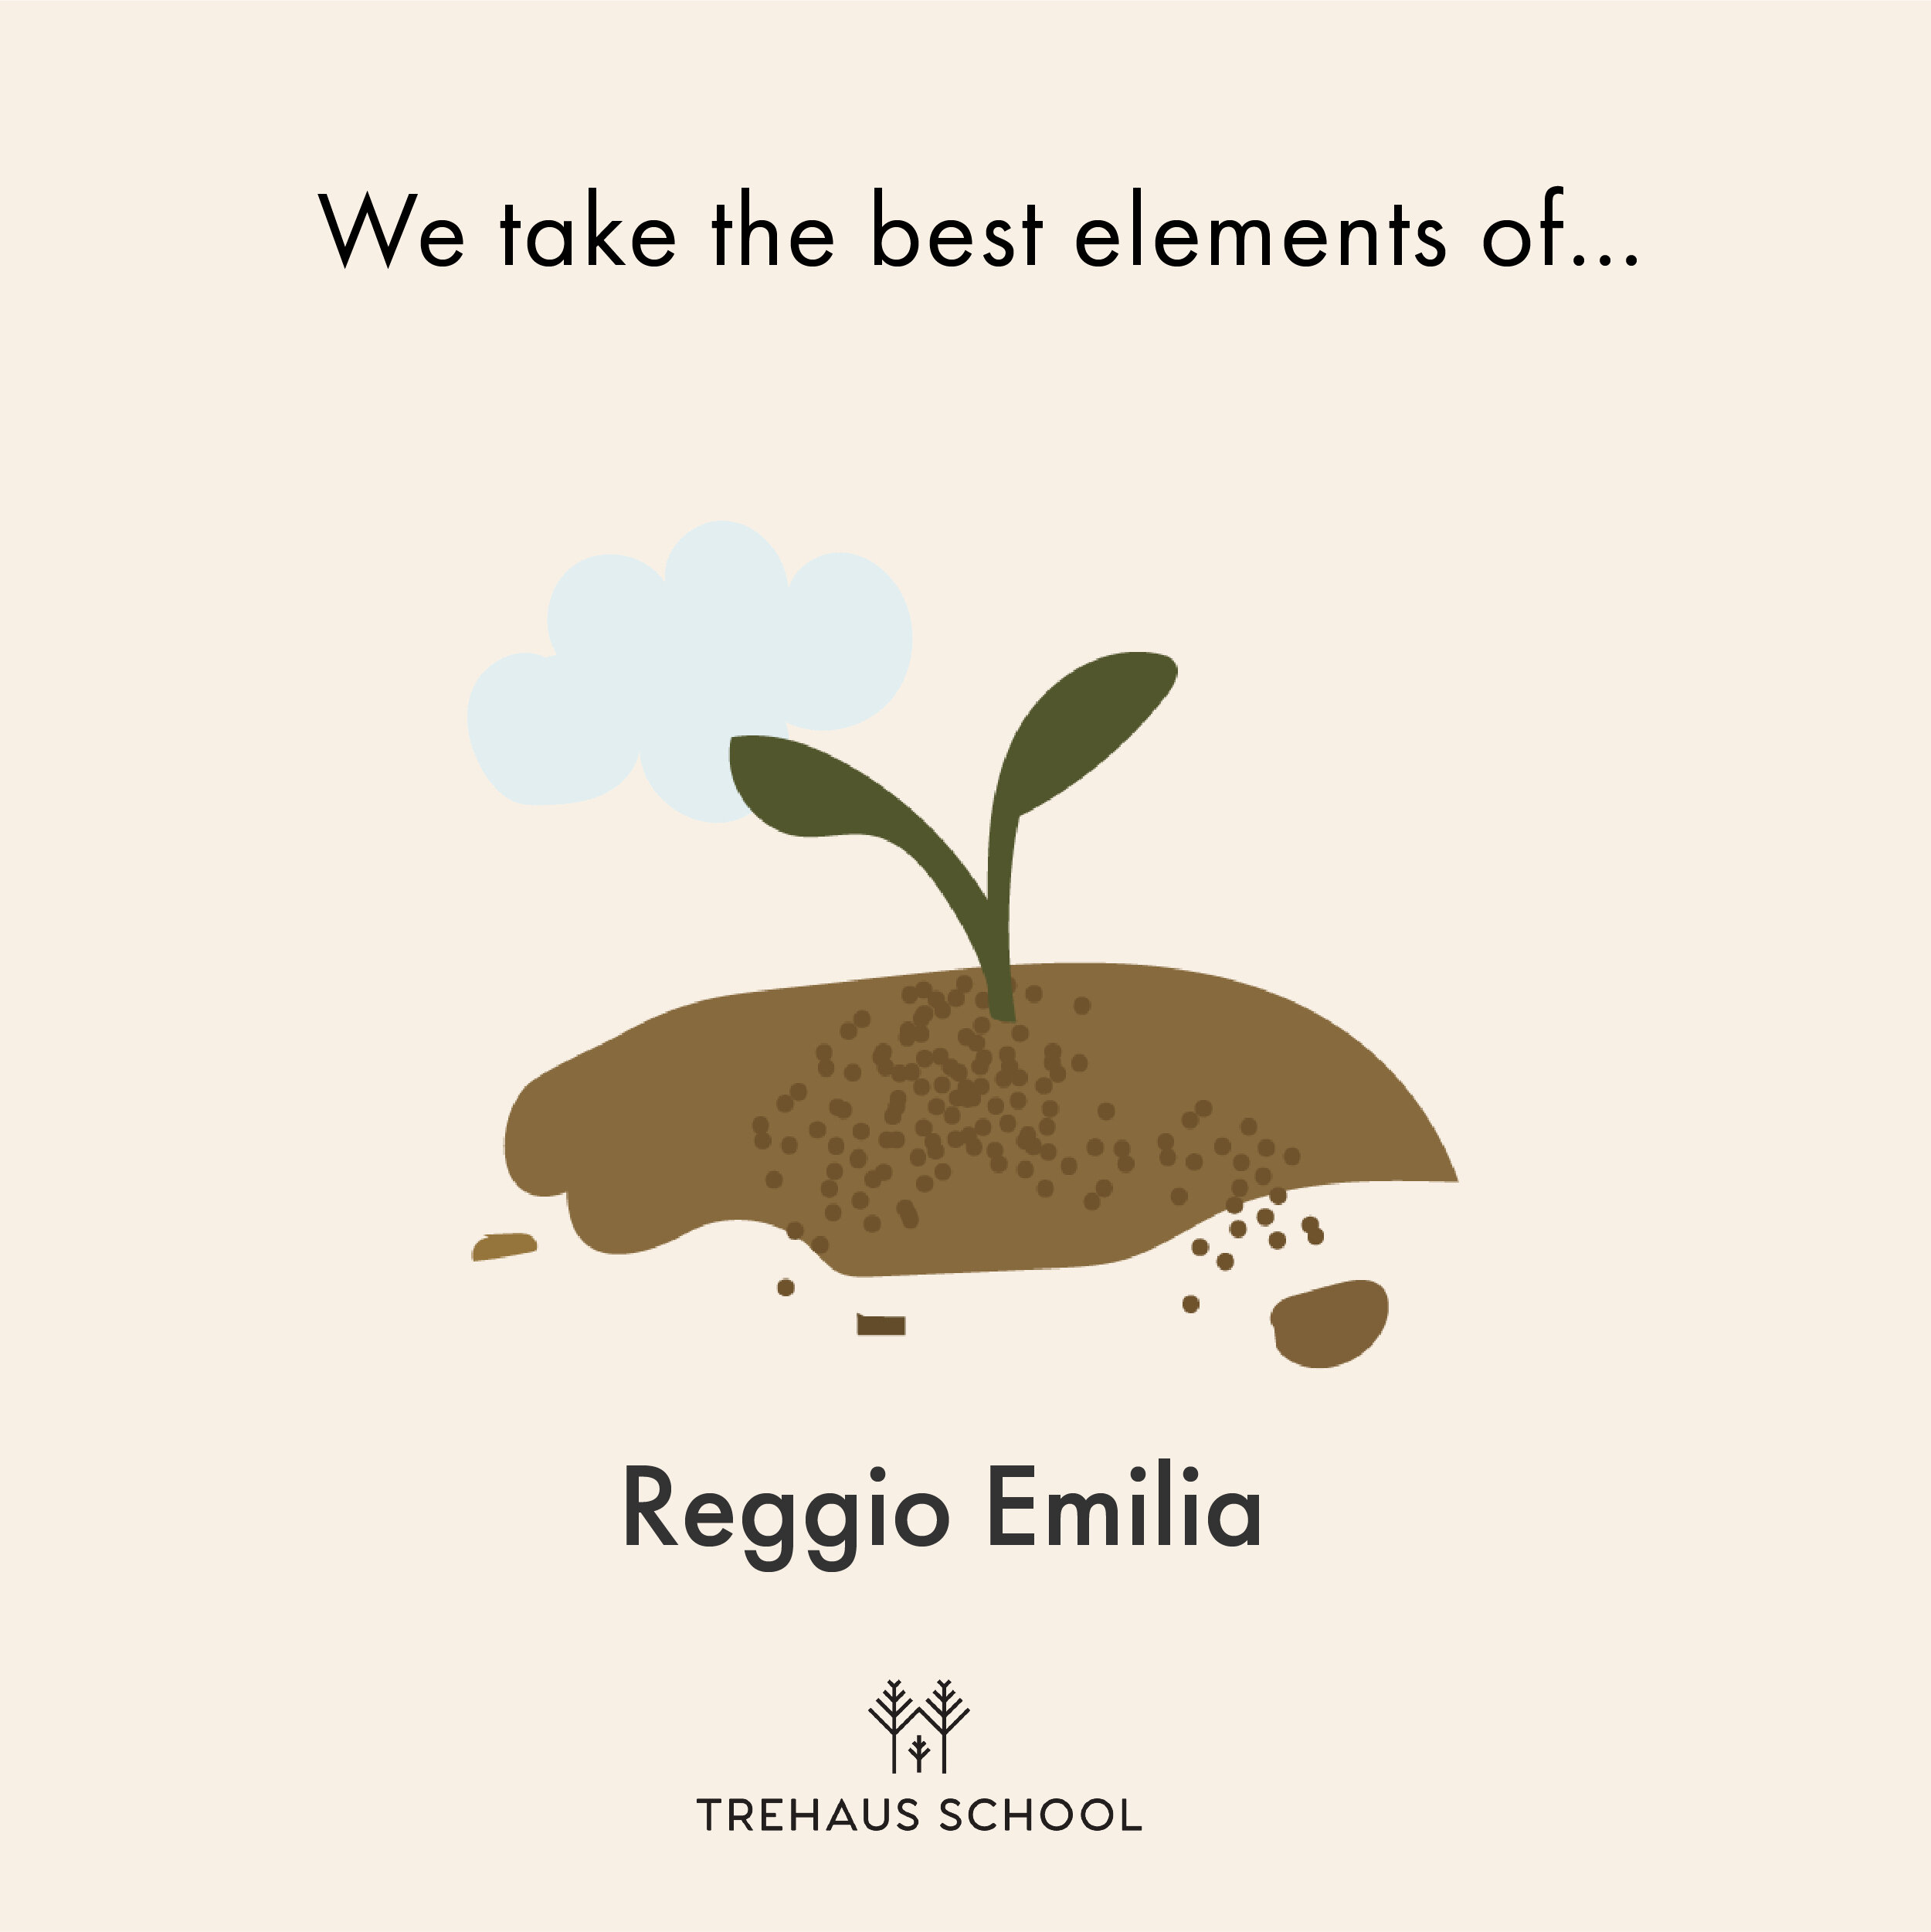 Let's learn more about Reggio Emilia 🤓⁣
⁣
Key Principles Reggio Emilia: 🍃⁣
⁣
1. Children are capable to construct their own learning.⁣
2. Children are collaborators and learn through interaction within their communities.⁣
3. Children are natural co